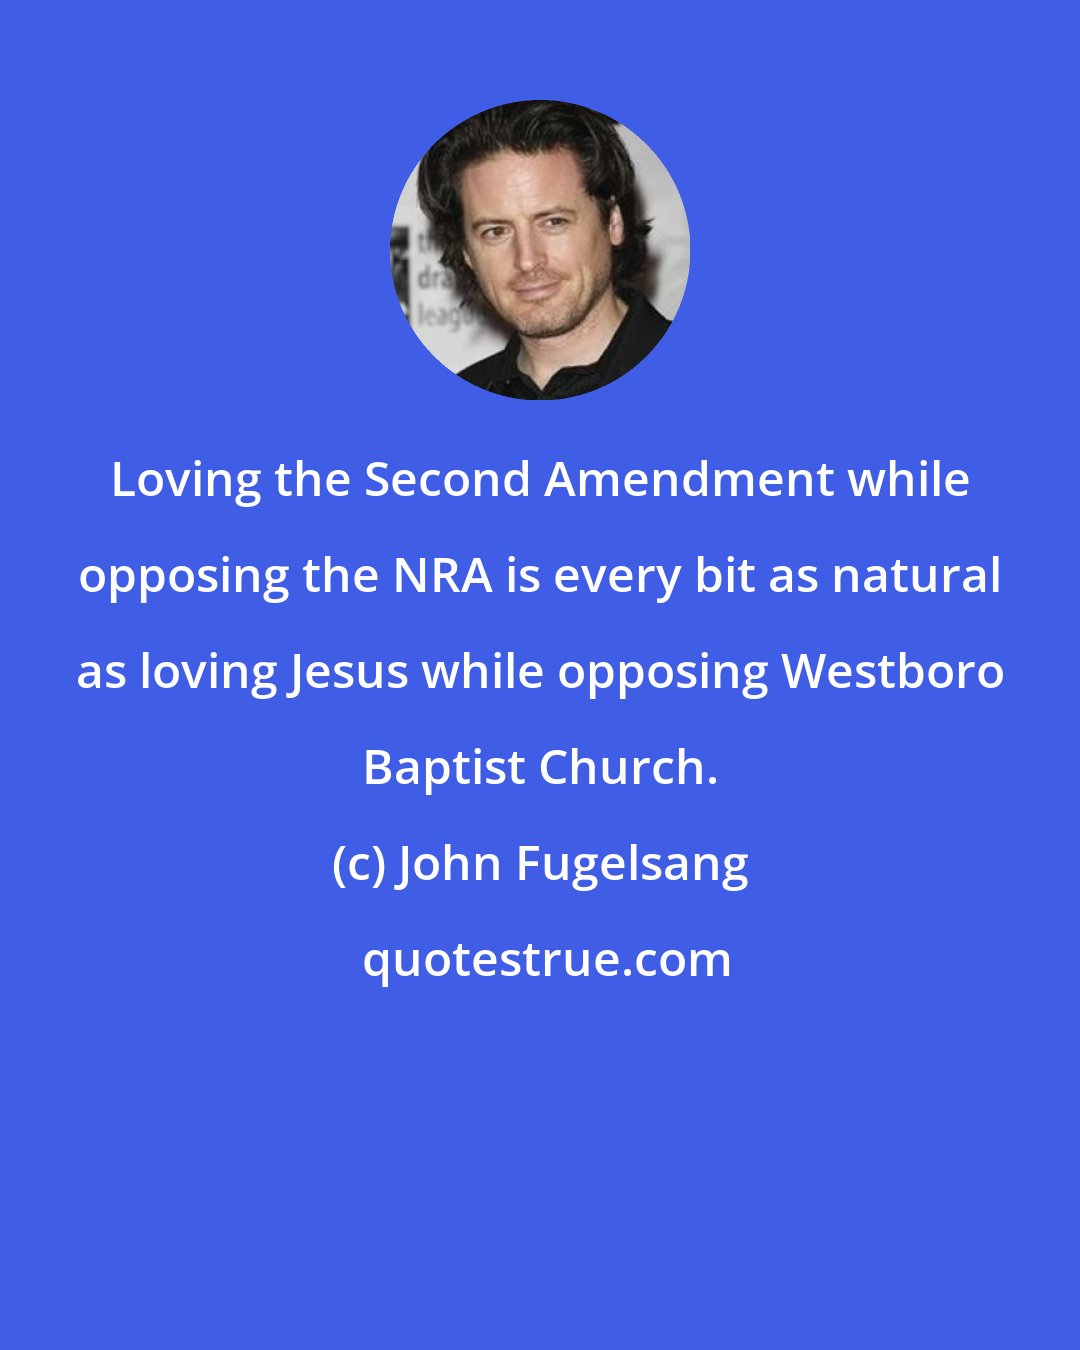 John Fugelsang: Loving the Second Amendment while opposing the NRA is every bit as natural as loving Jesus while opposing Westboro Baptist Church.